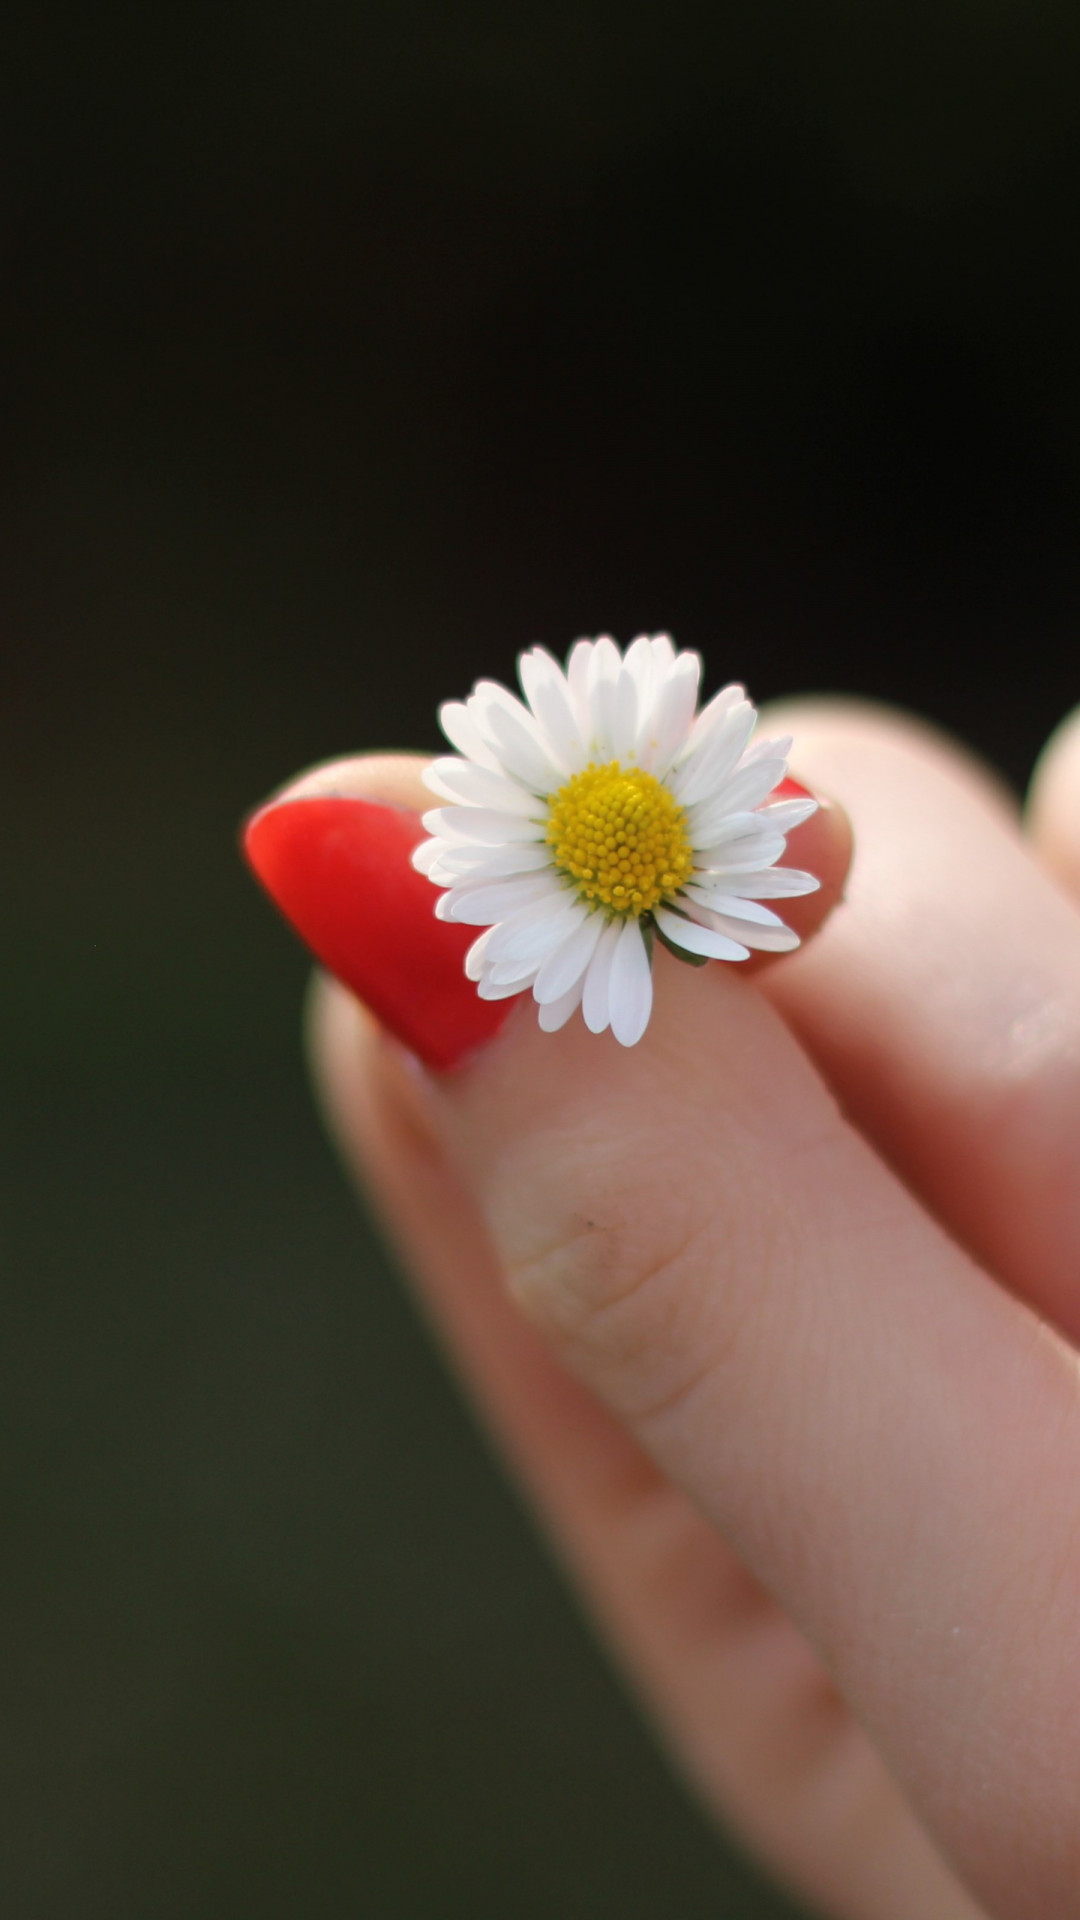 Girl with red nails and a daisy flower wallpaper 1080x1920